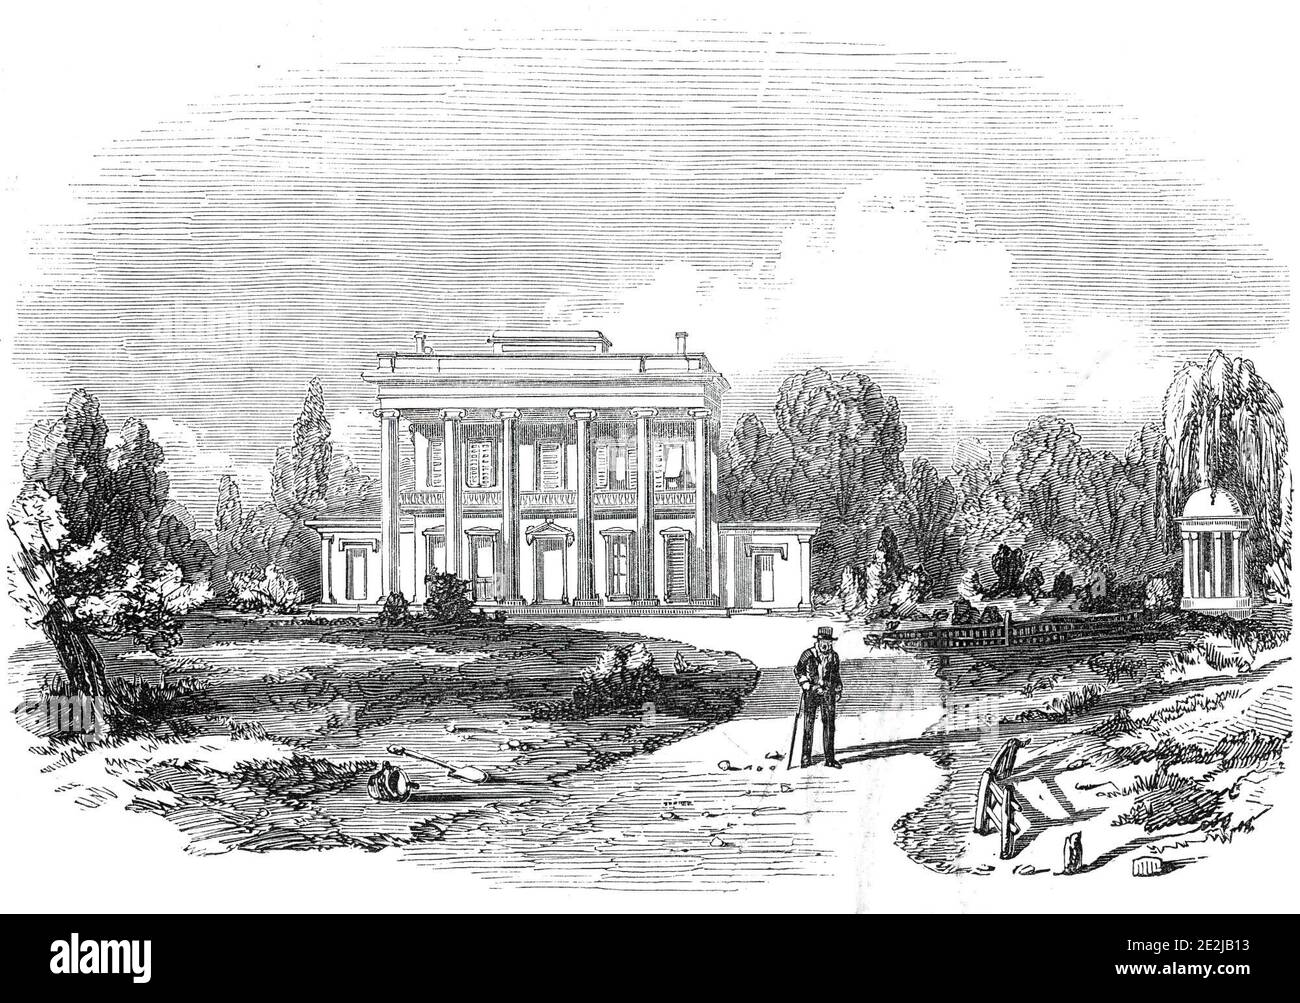 The Hermitage, the Residence and Burial Place of General Jackson, 1845. View of The Hermitage plantation in Tennessee, USA. Hundreds of enslaved African American men, women, and children were forced to produce cotton, the source of Jackson's wealth. The mansion was remodelled in 1831, under the direction of architect David Morrison. From &quot;Illustrated London News&quot;, 1845, Vol VII. Stock Photo